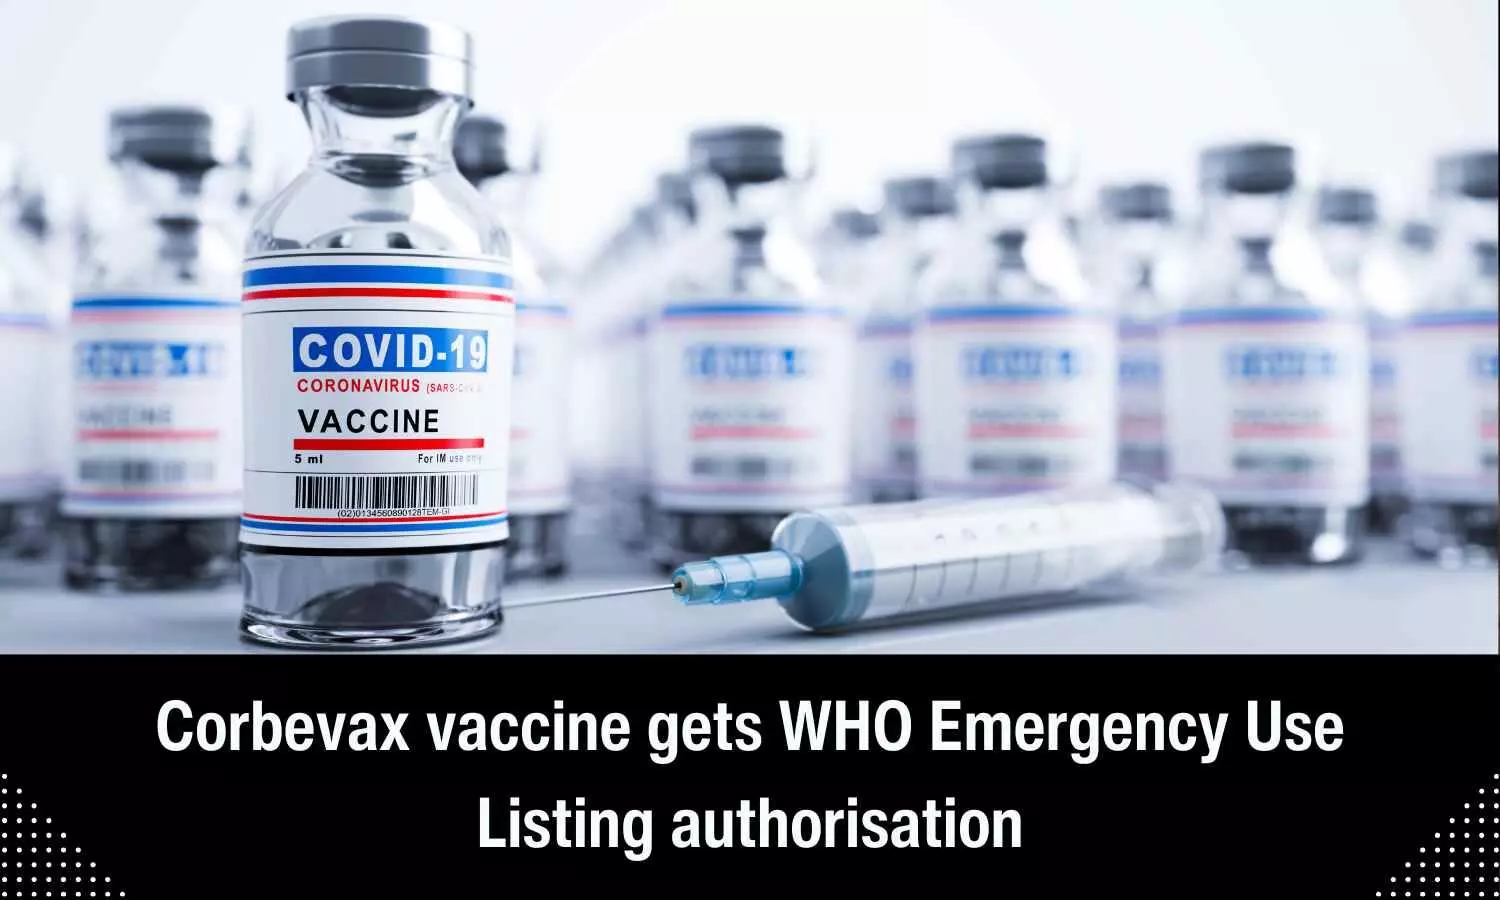 Biological E Corbevax vaccine gets WHO Emergency Use Listing authorisation